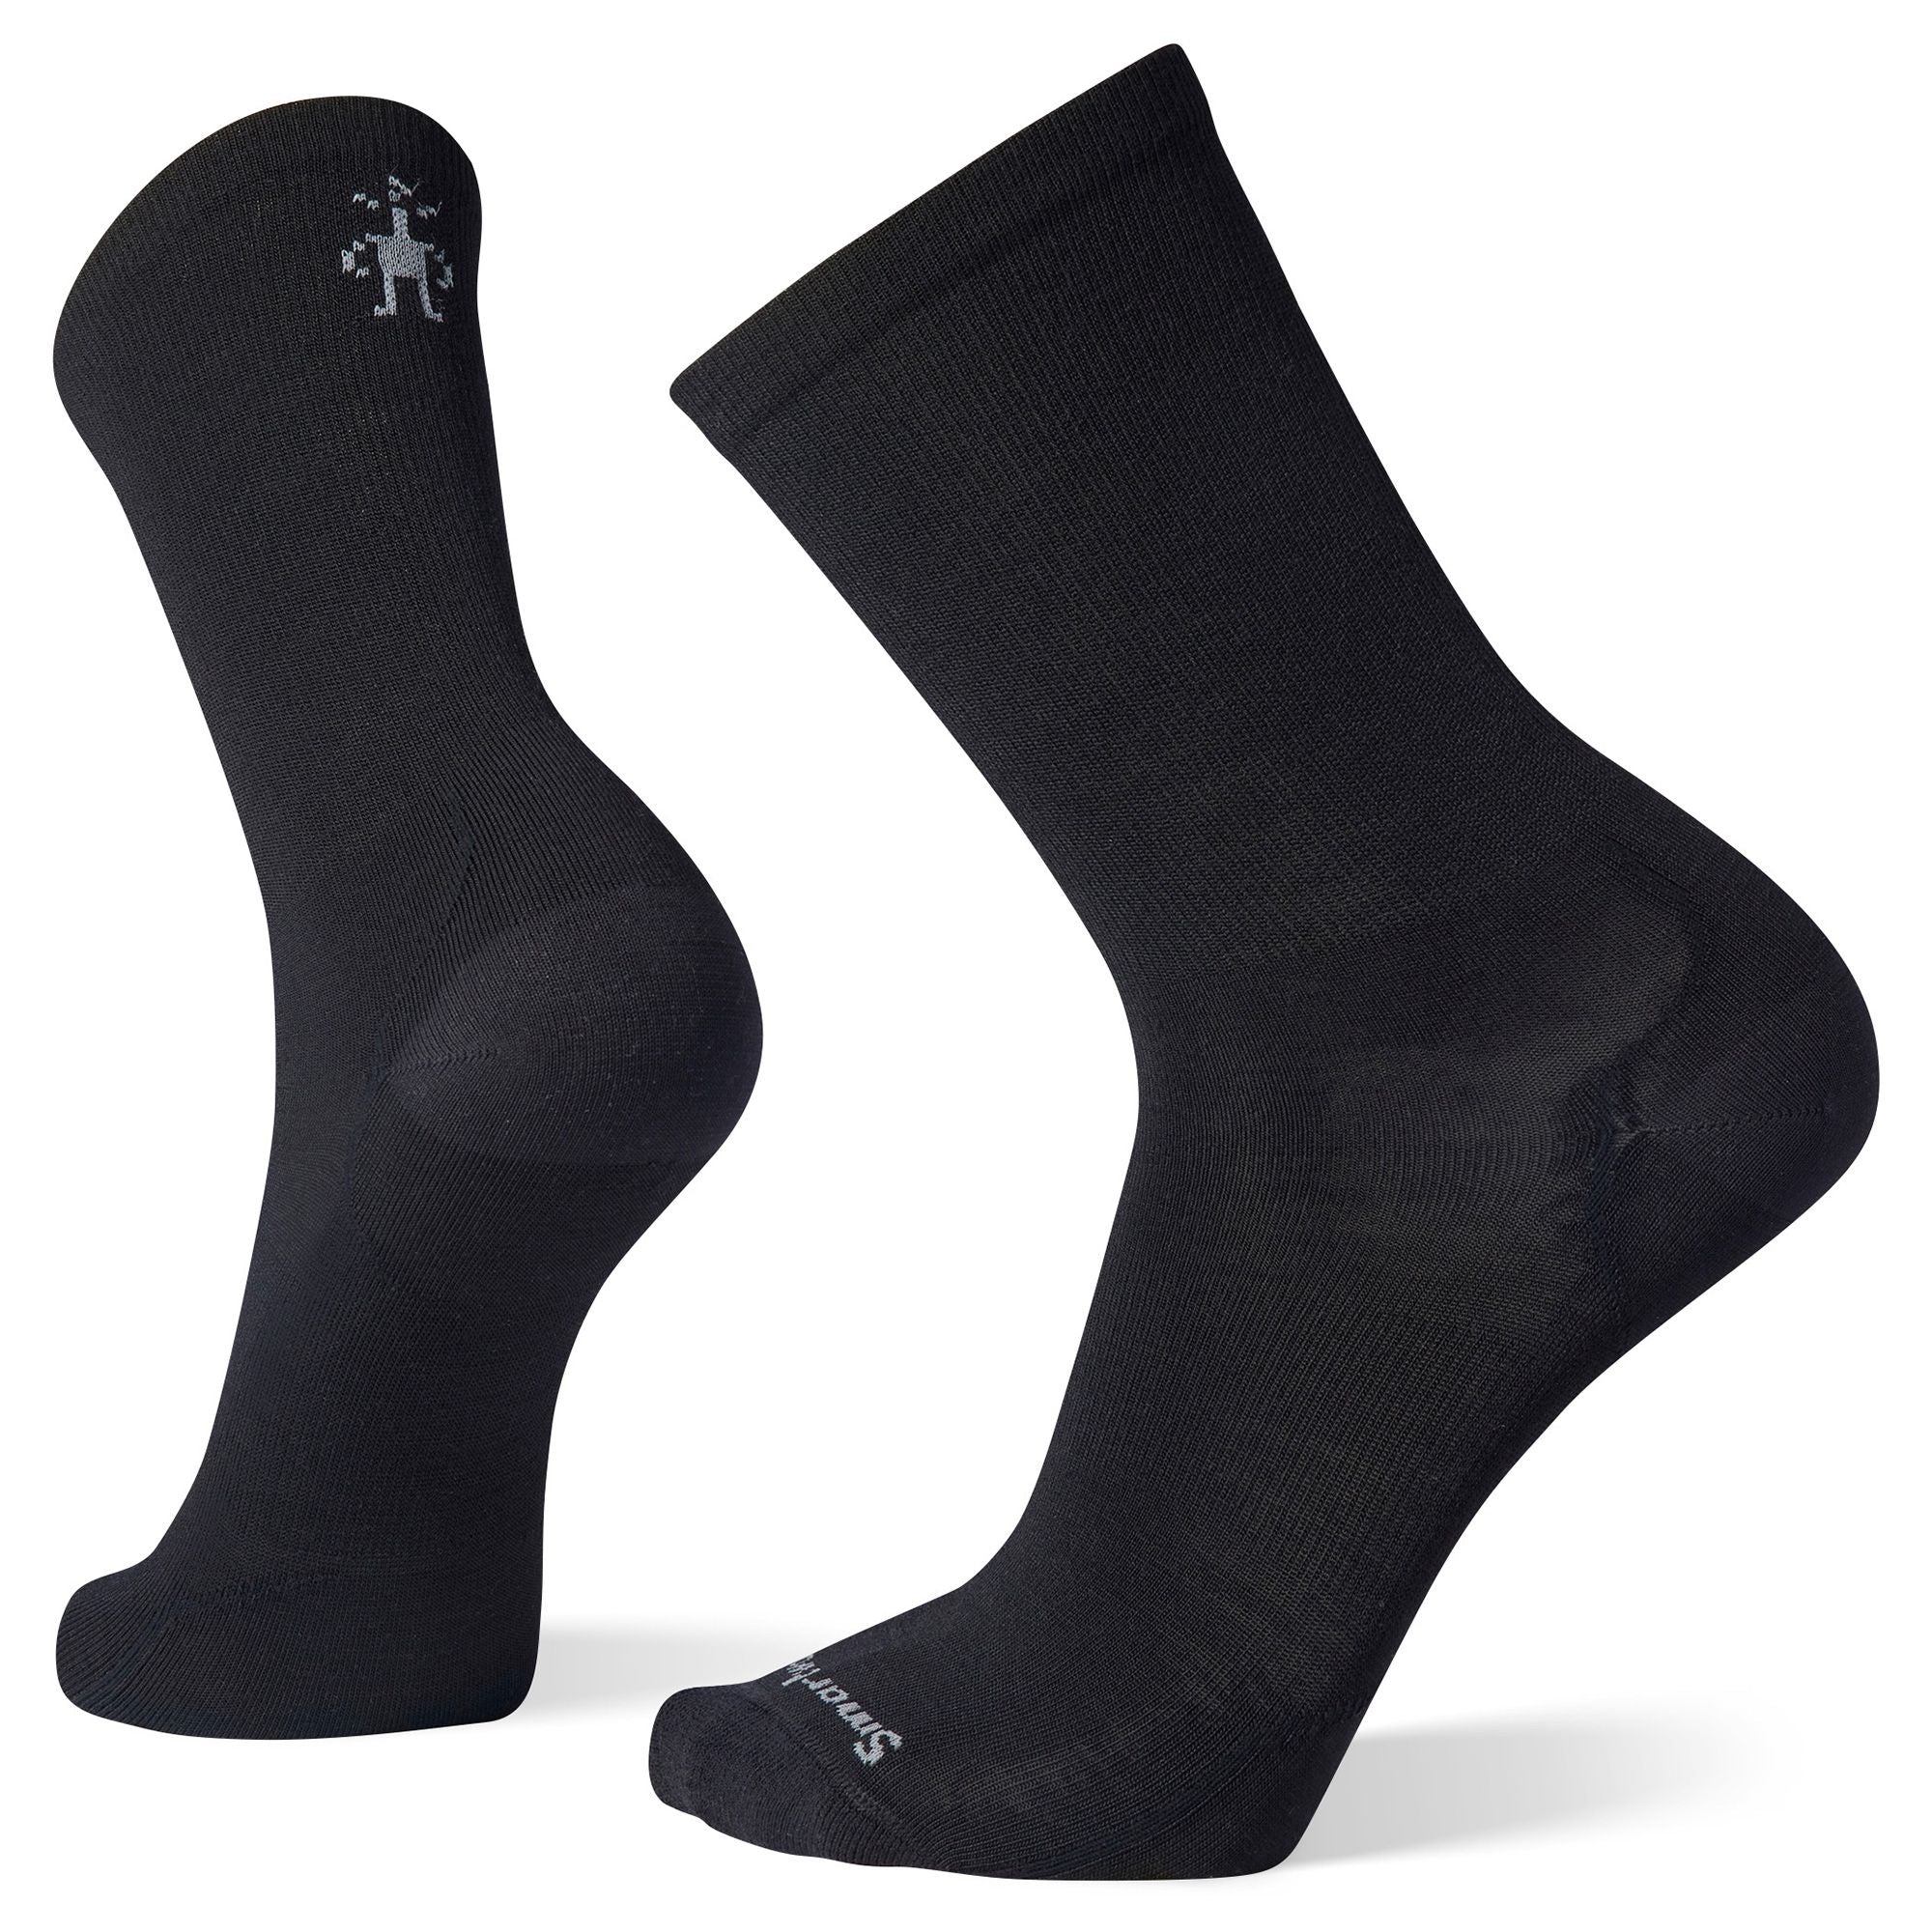 Our Everyday Anchor Line Crew socks will help keep you comfortable on your everyday adventures.